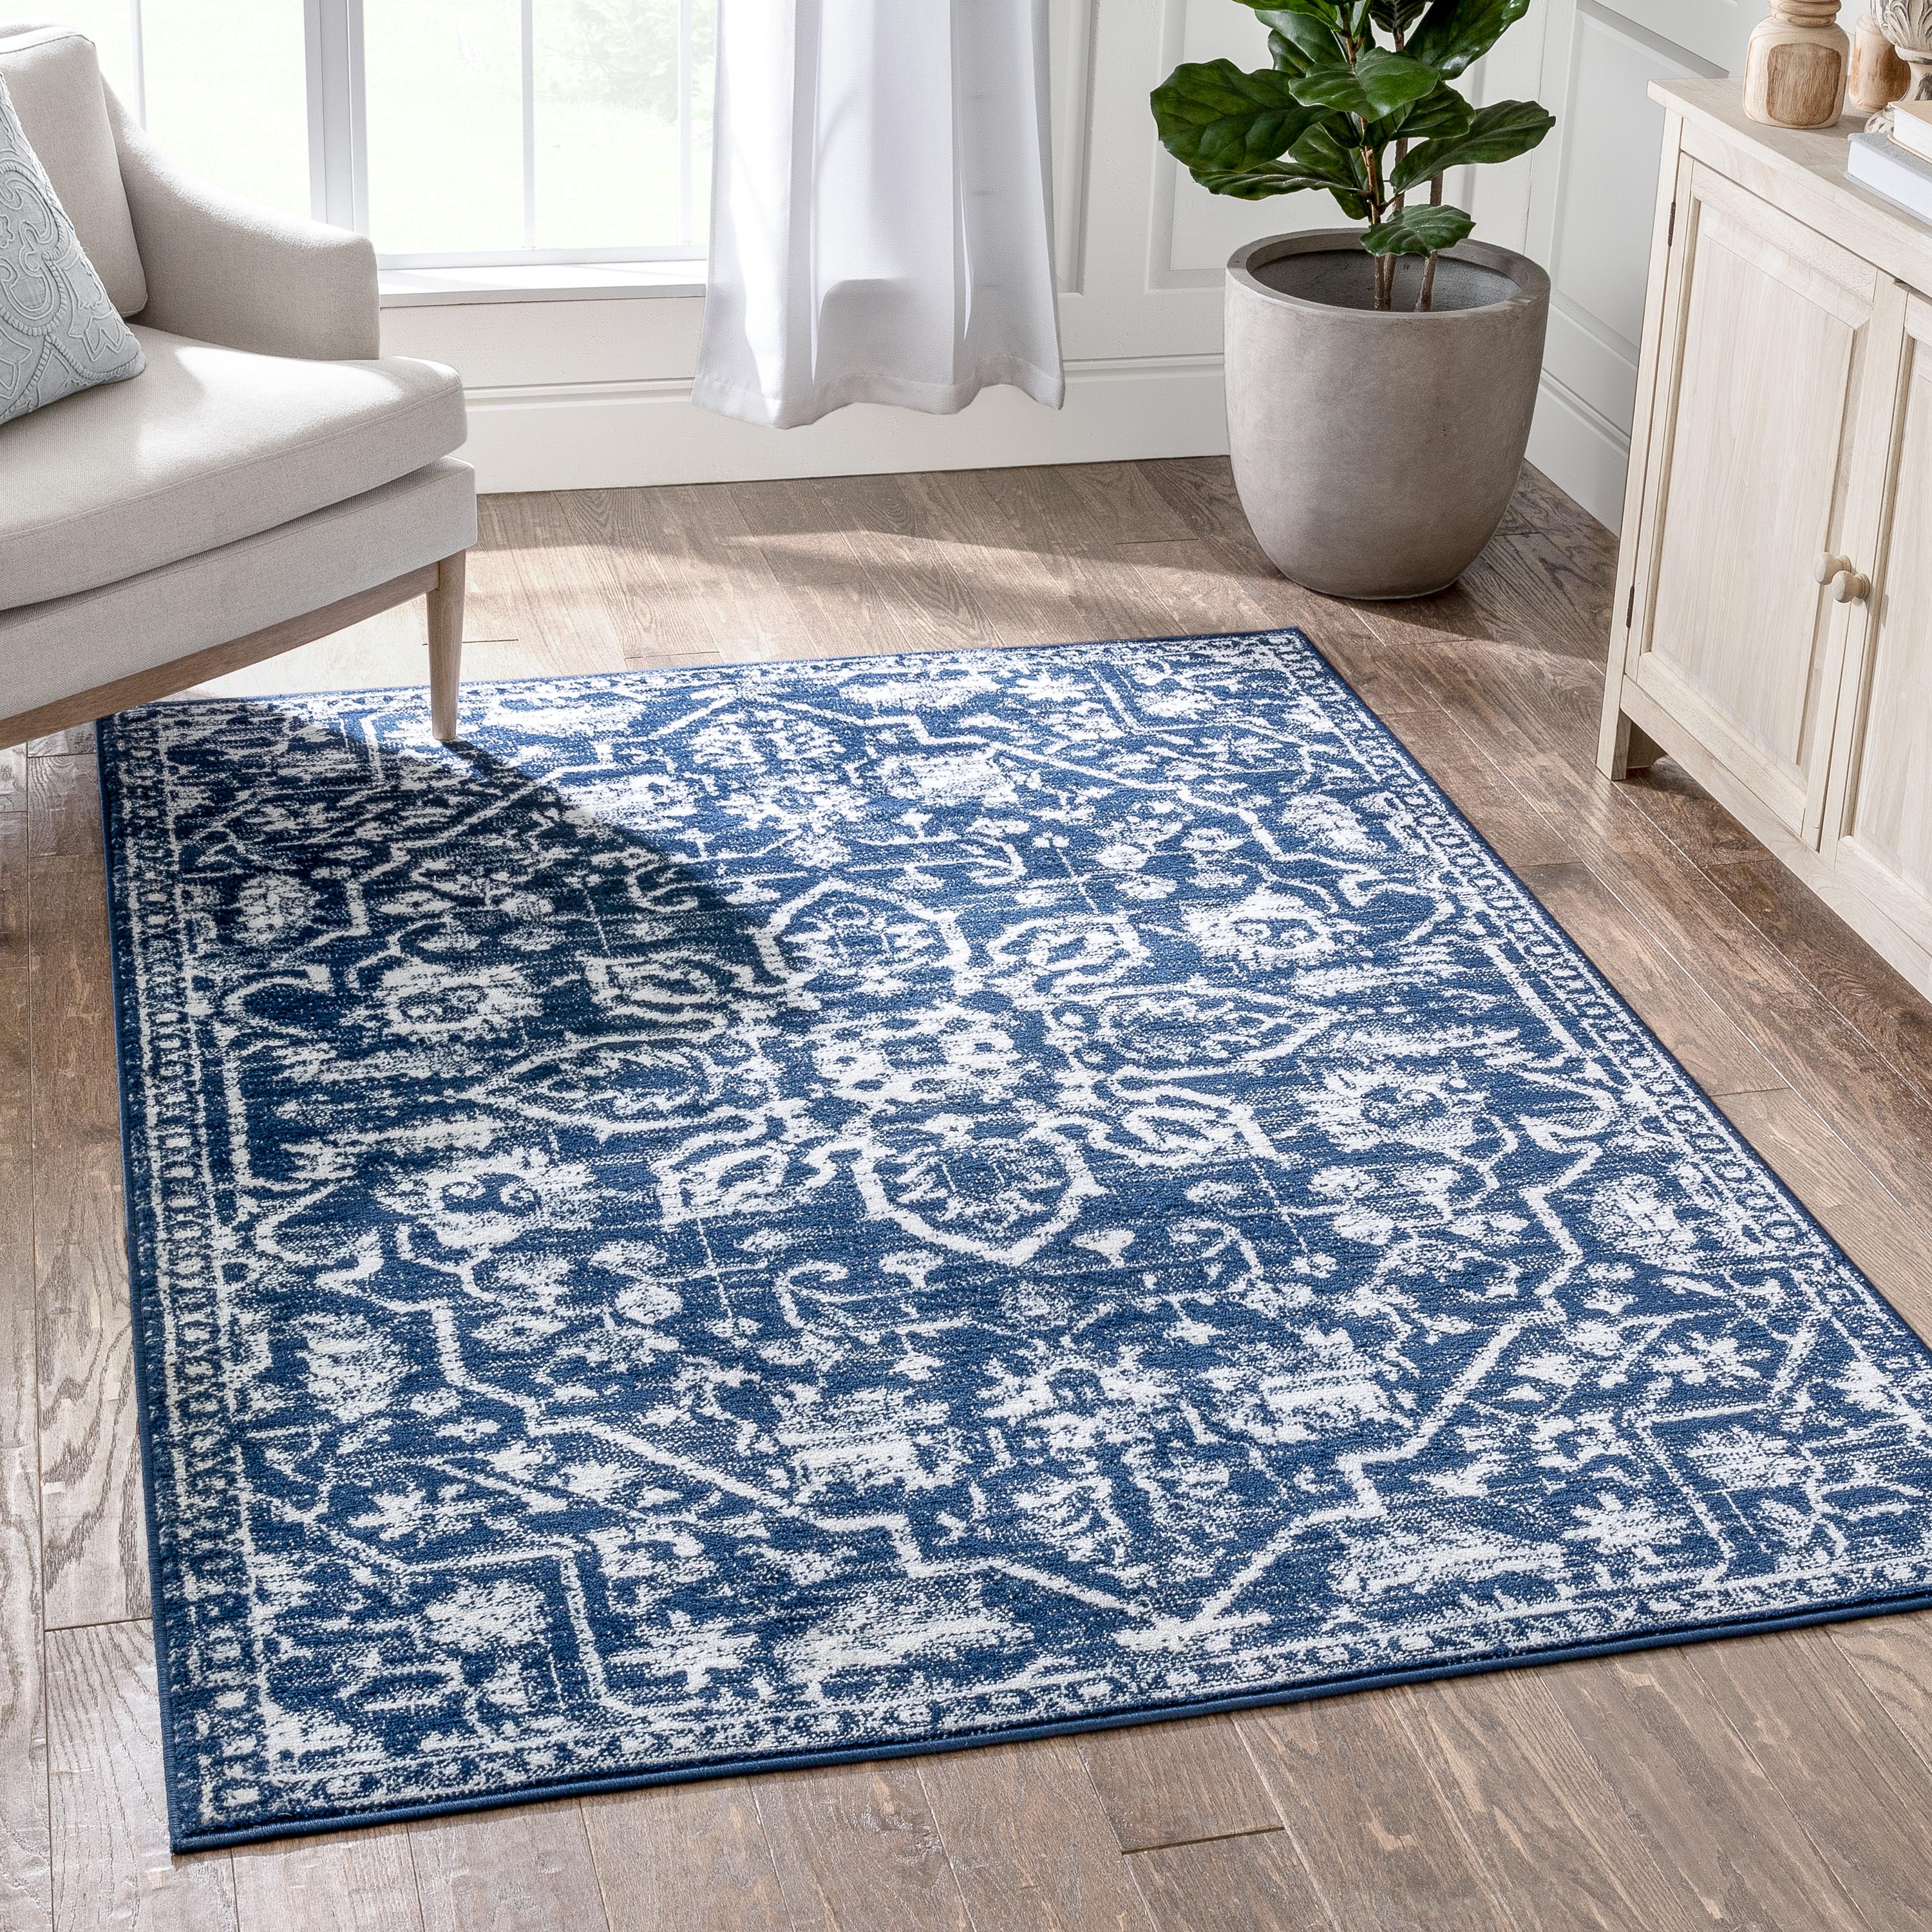 Well Woven Dazzle Disa Vintage Bohemian Oriental Floral Dark Blue 5'3" x 7'3" Area Rug - image 1 of 9